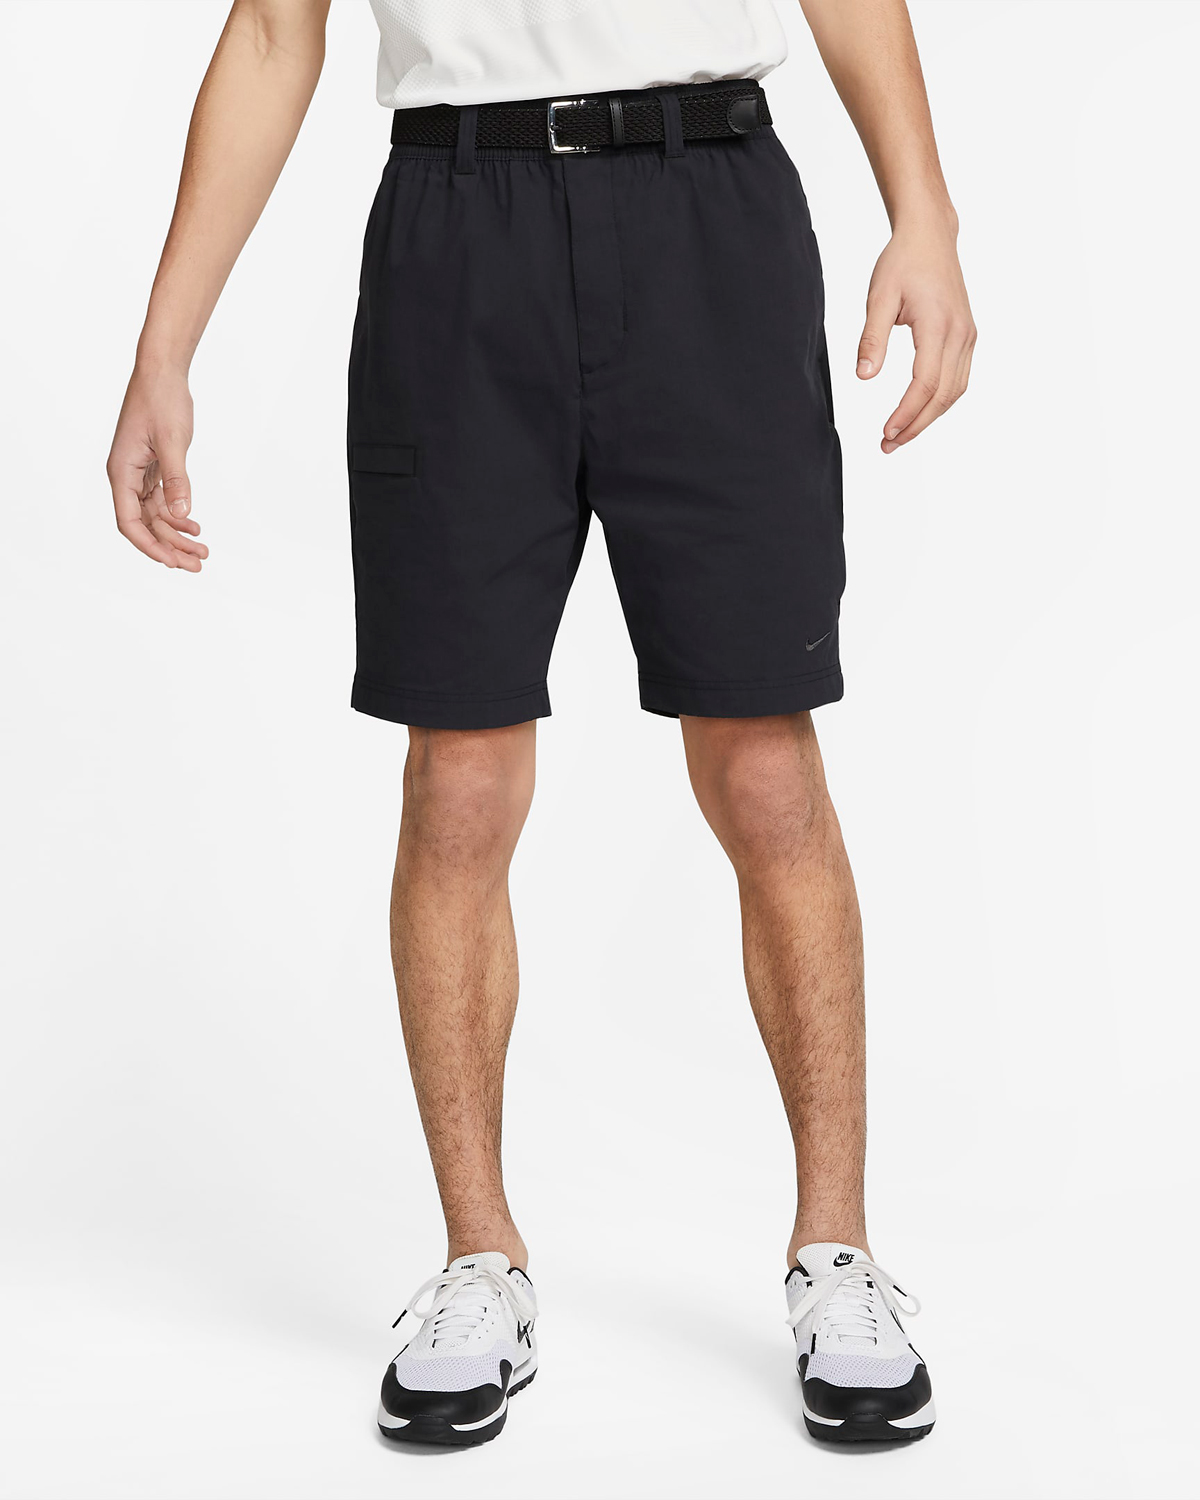 Nike-Unscripted-Golf-Shorts-Black-1